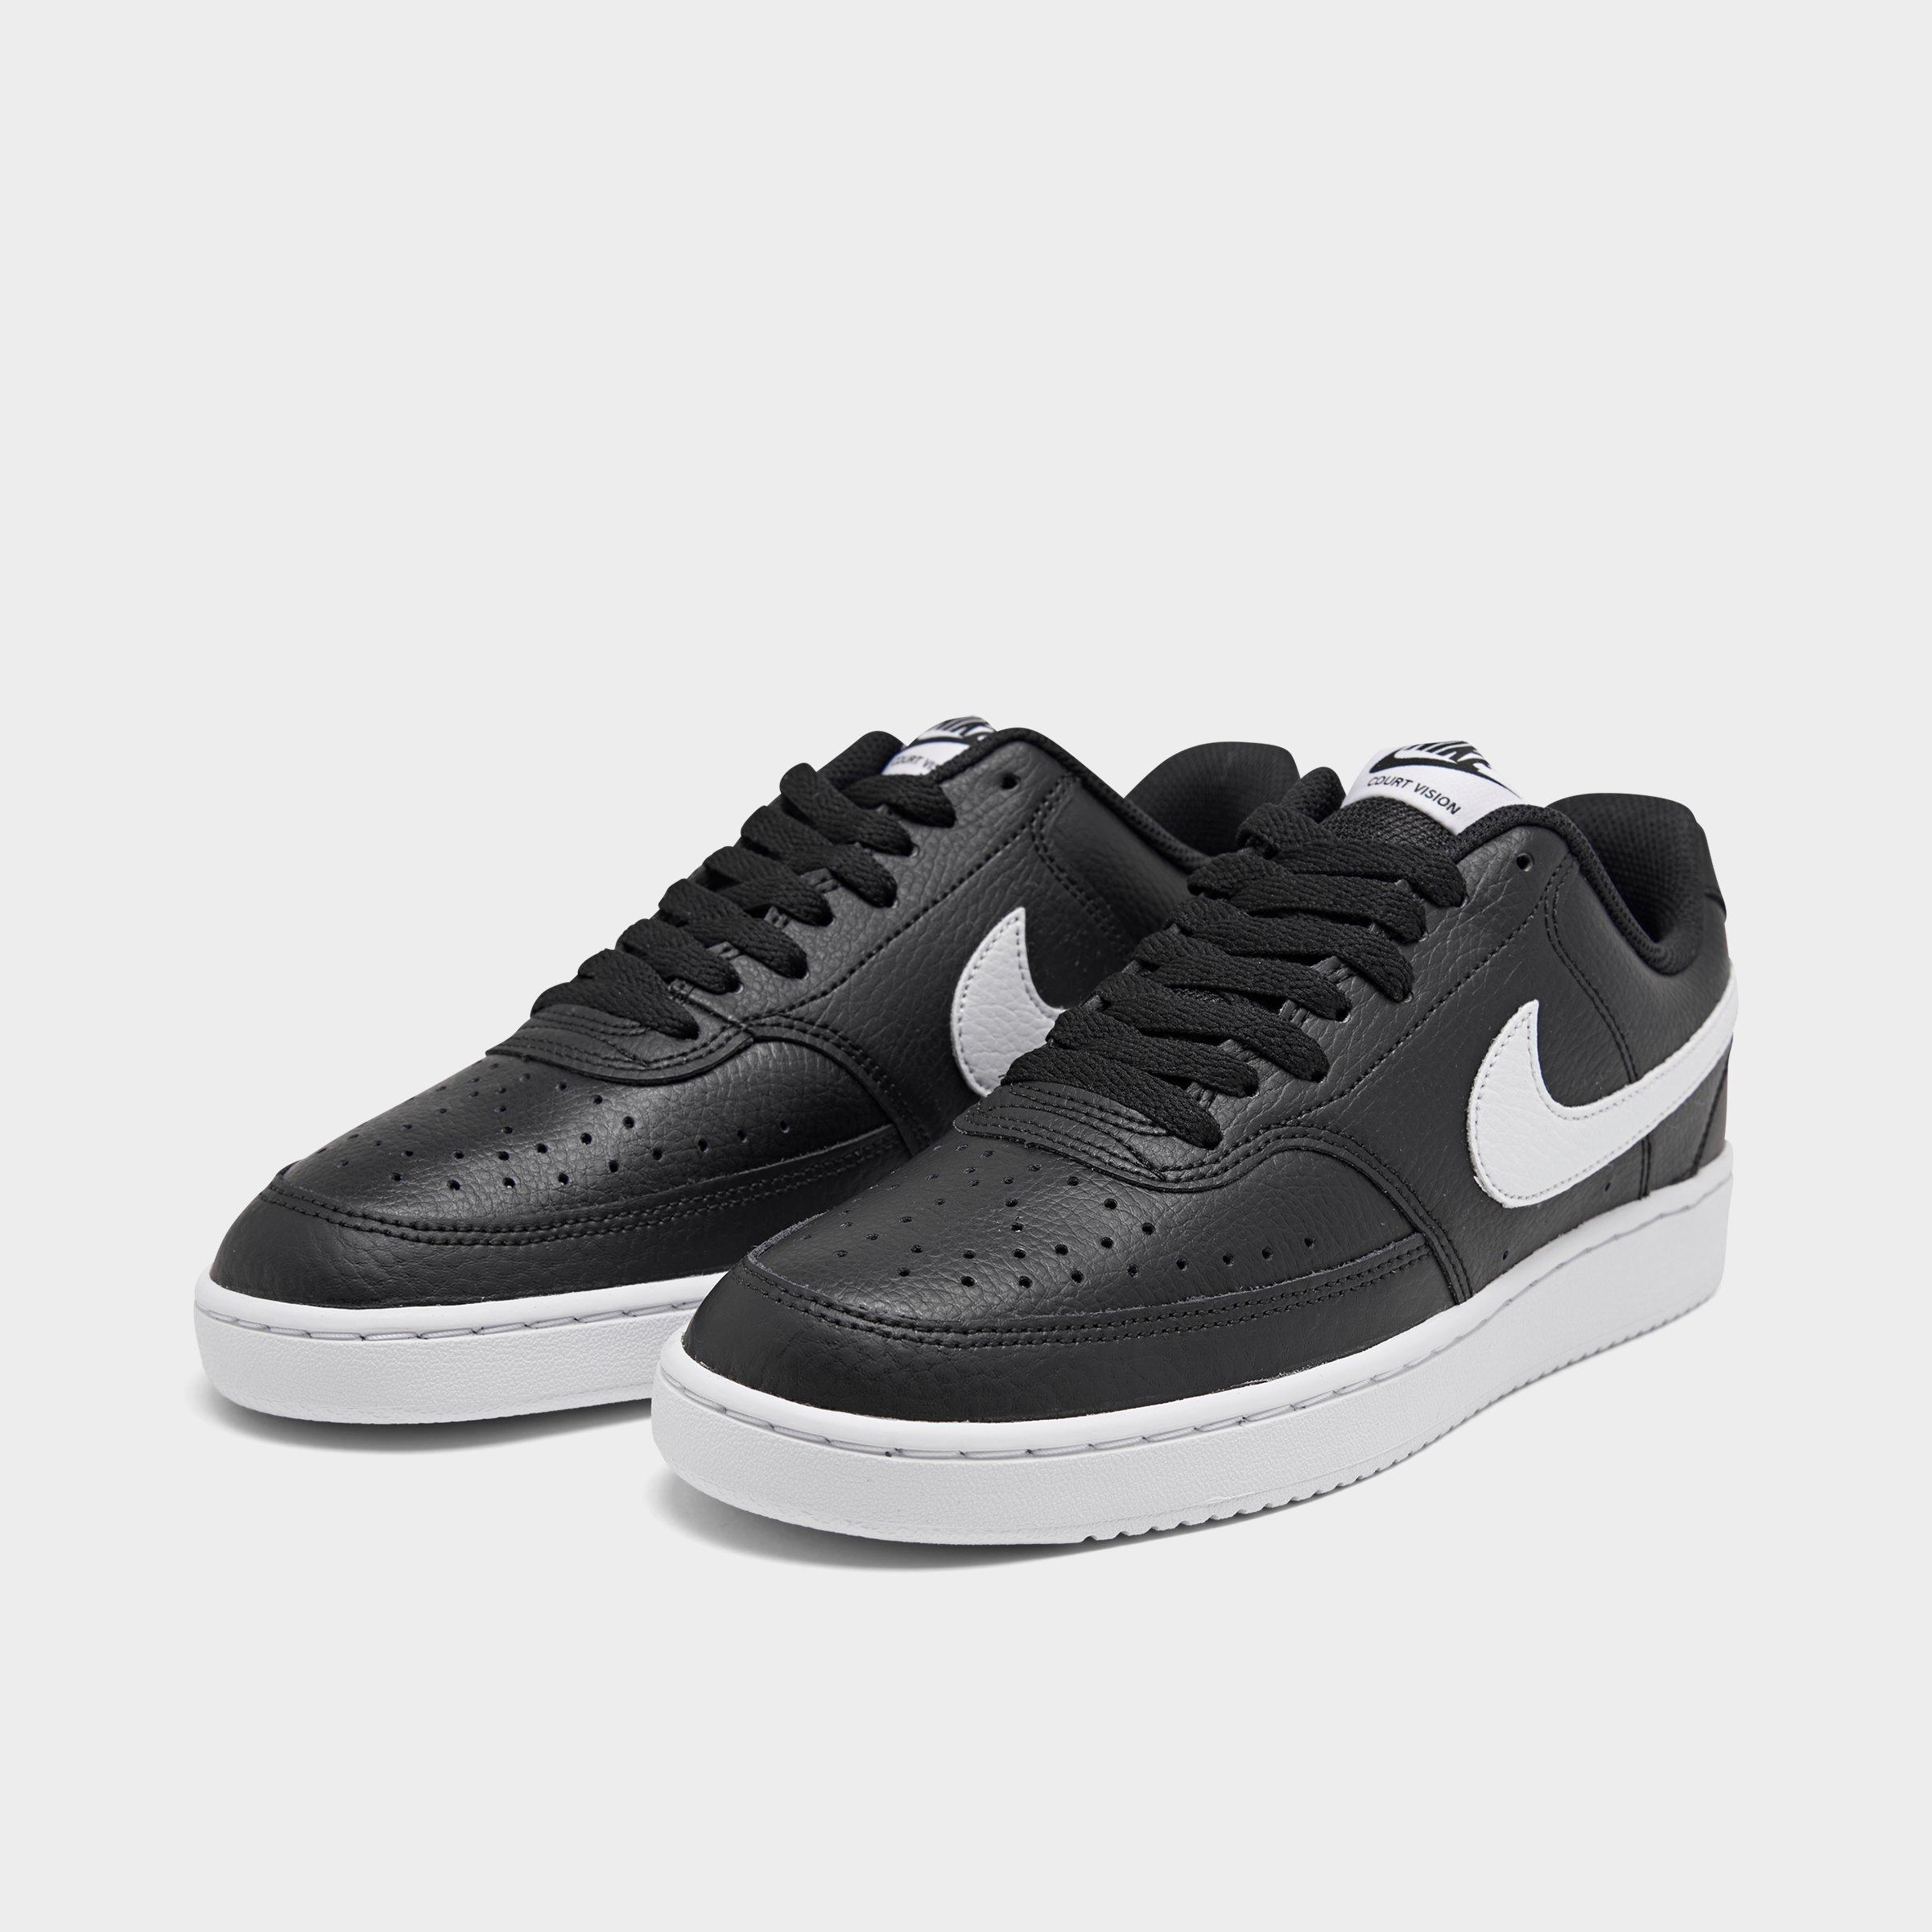 men's nikecourt vision low casual sneakers from finish line